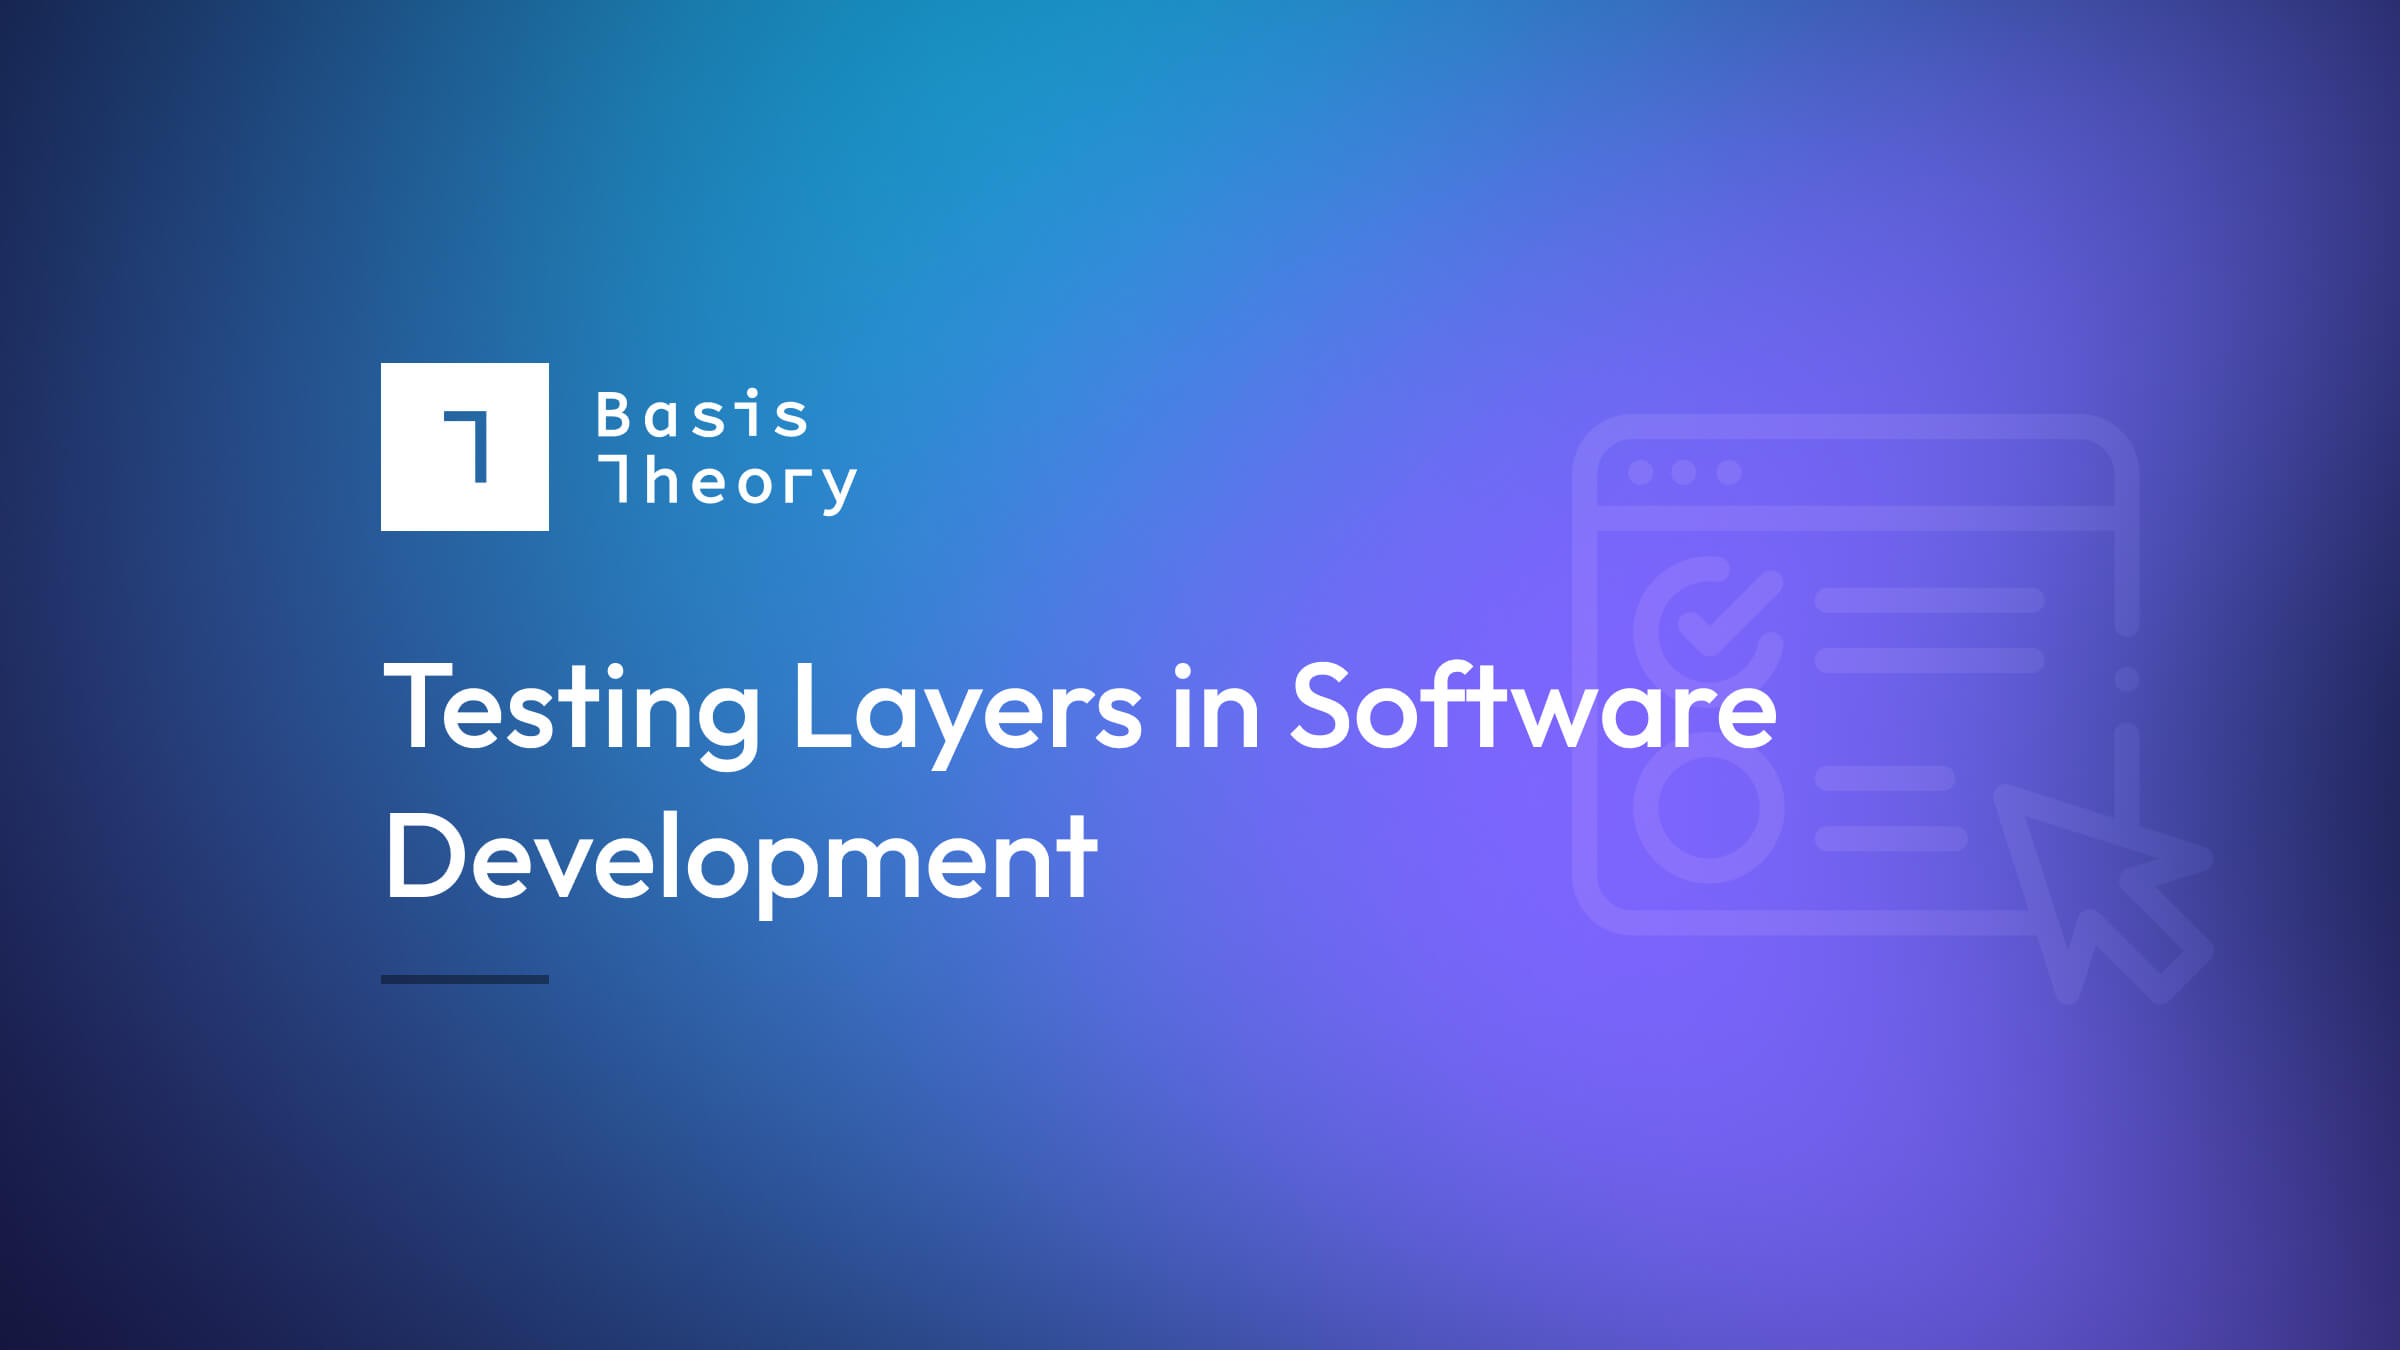 Testing layers in software development